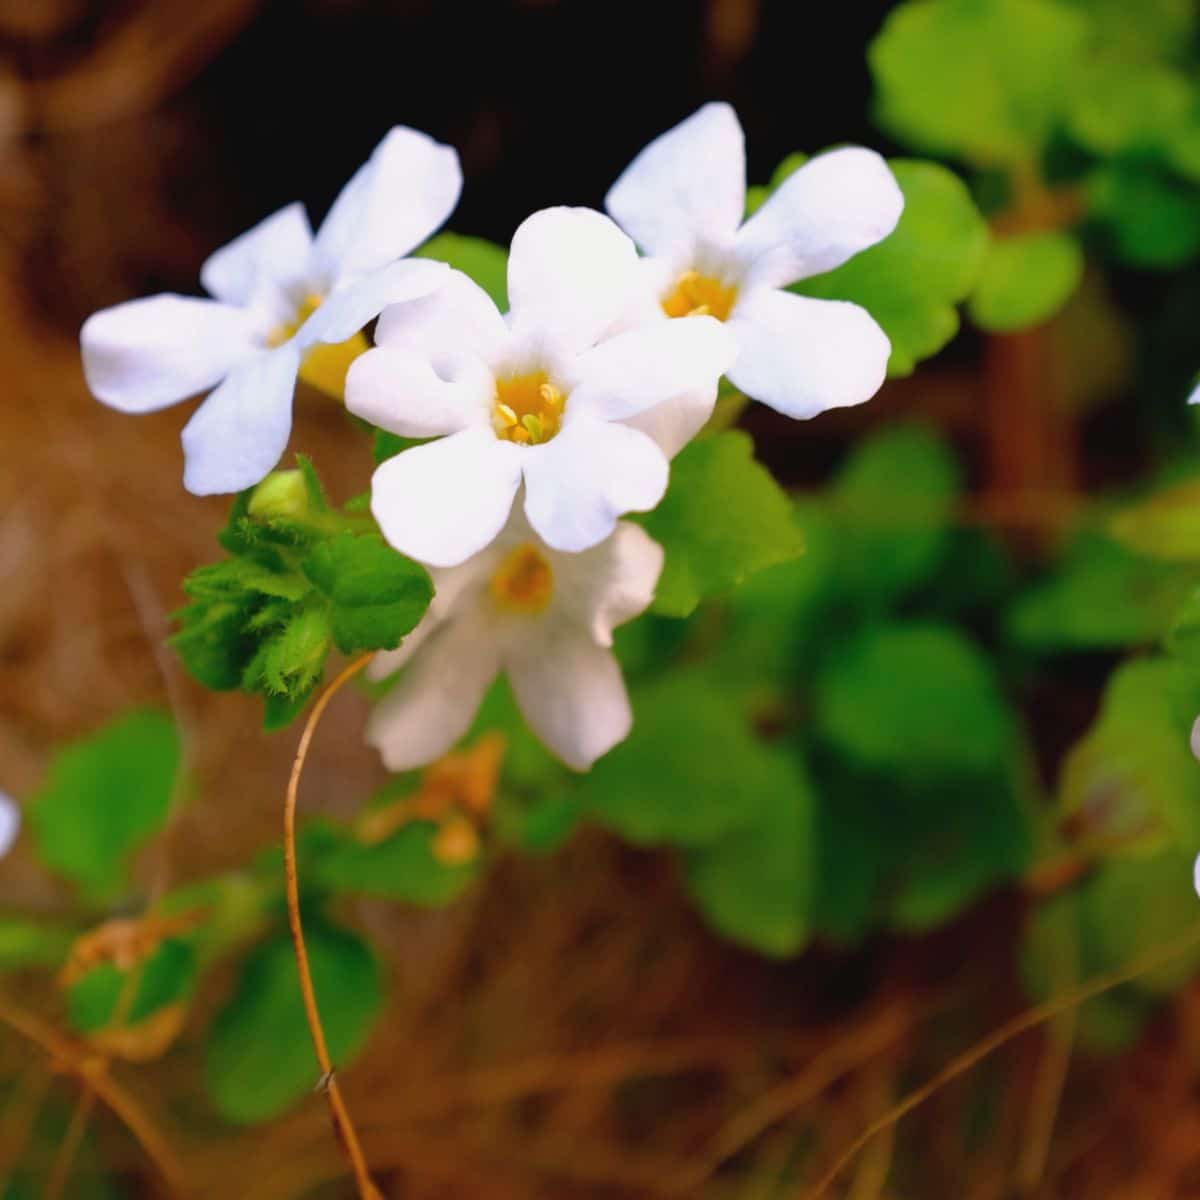 Healthy bacopa with flowers and young leaves.